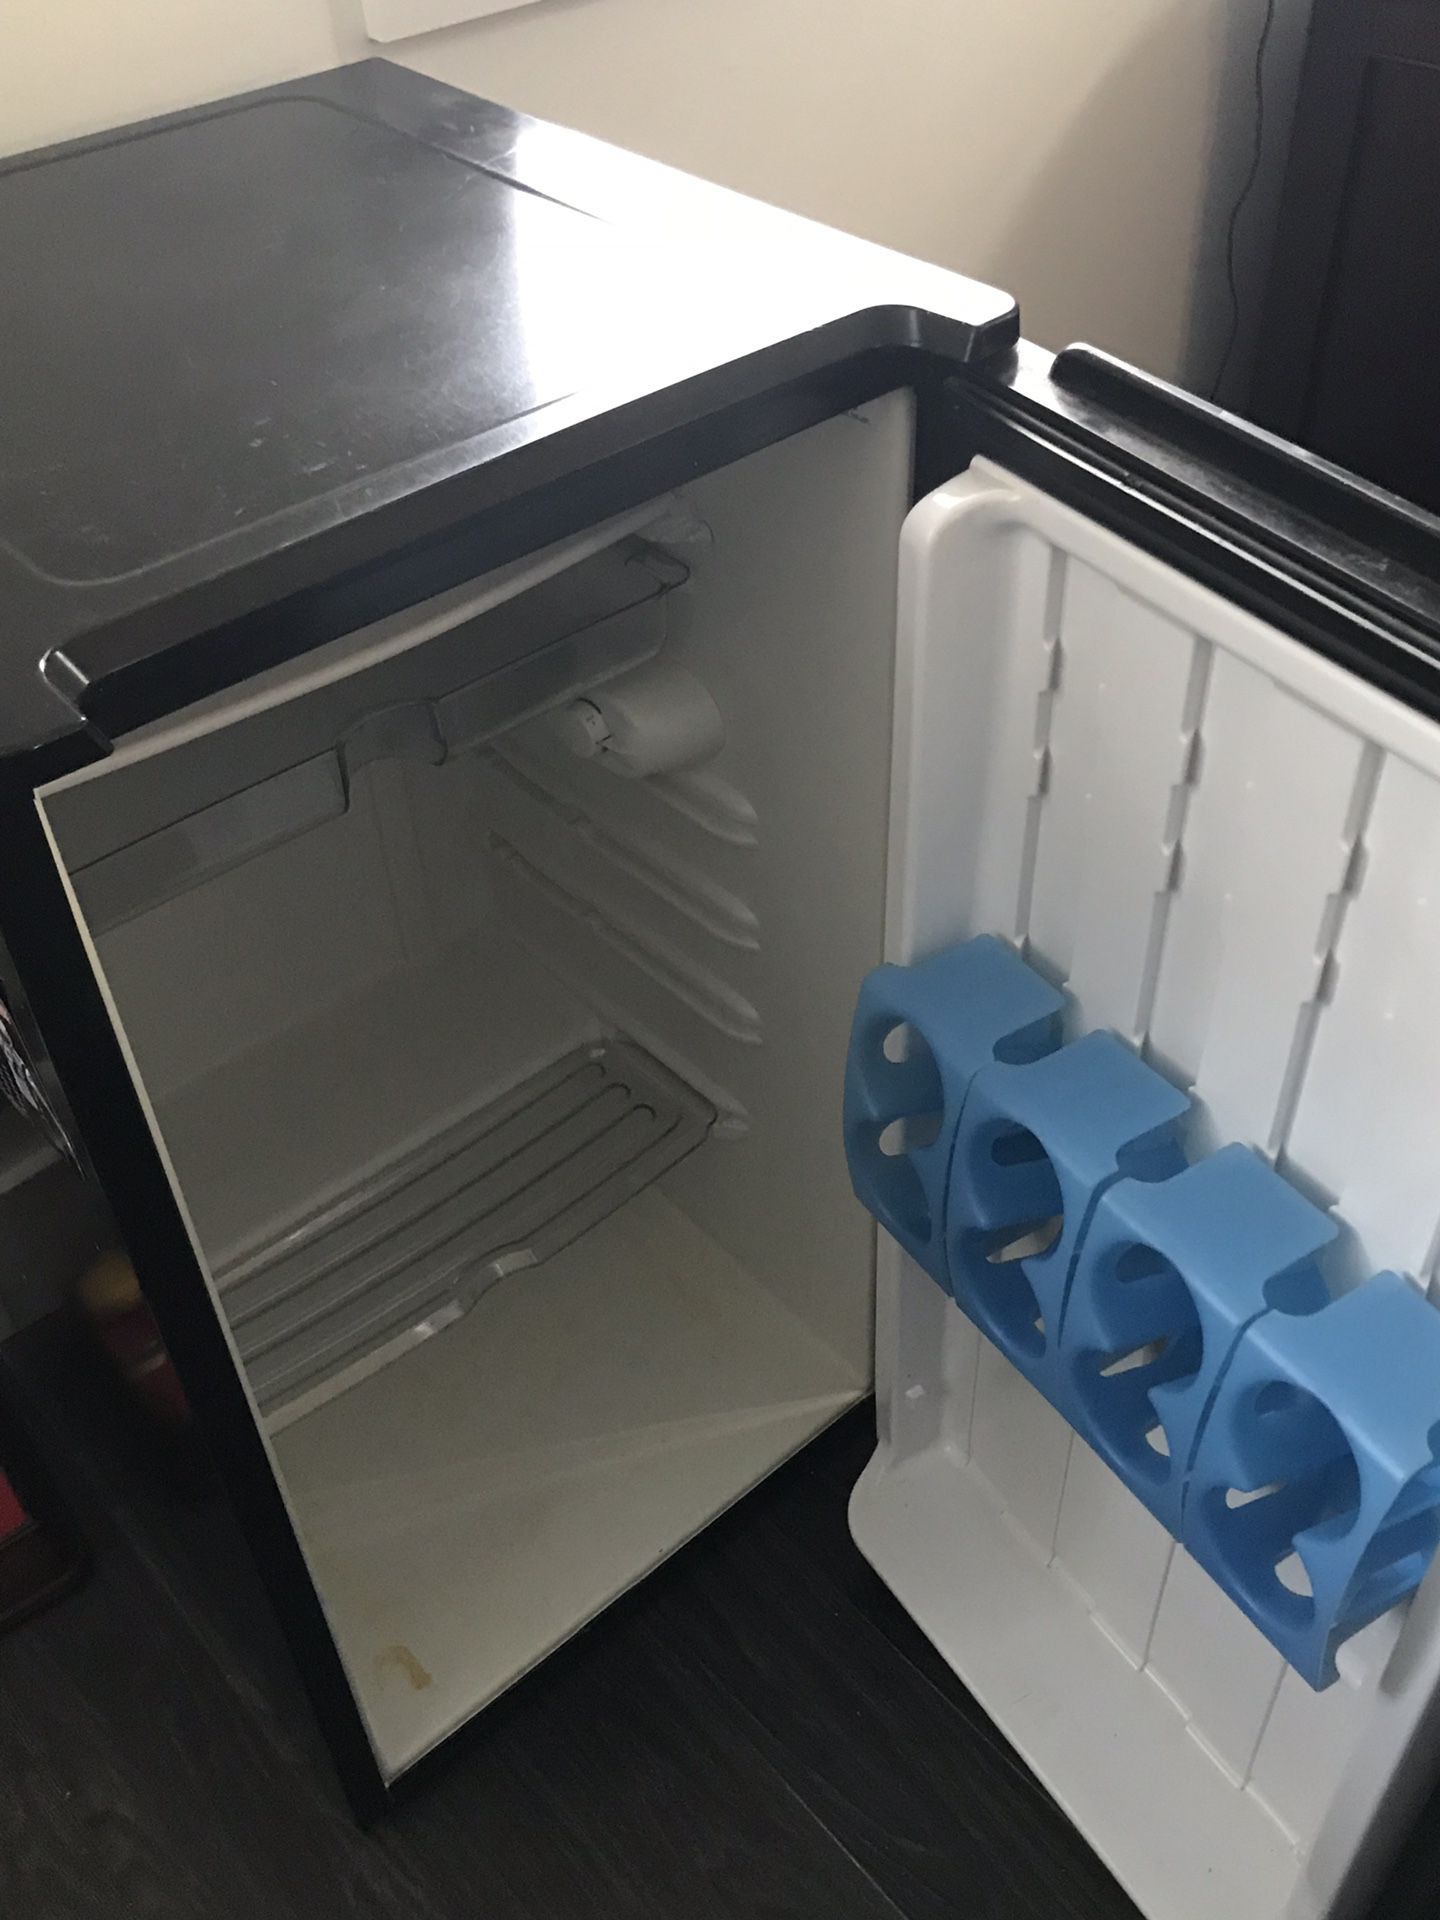 PRICE DROP - Mini Fridge w/ Freezer Tray and Can Holders just in time for Football Season!